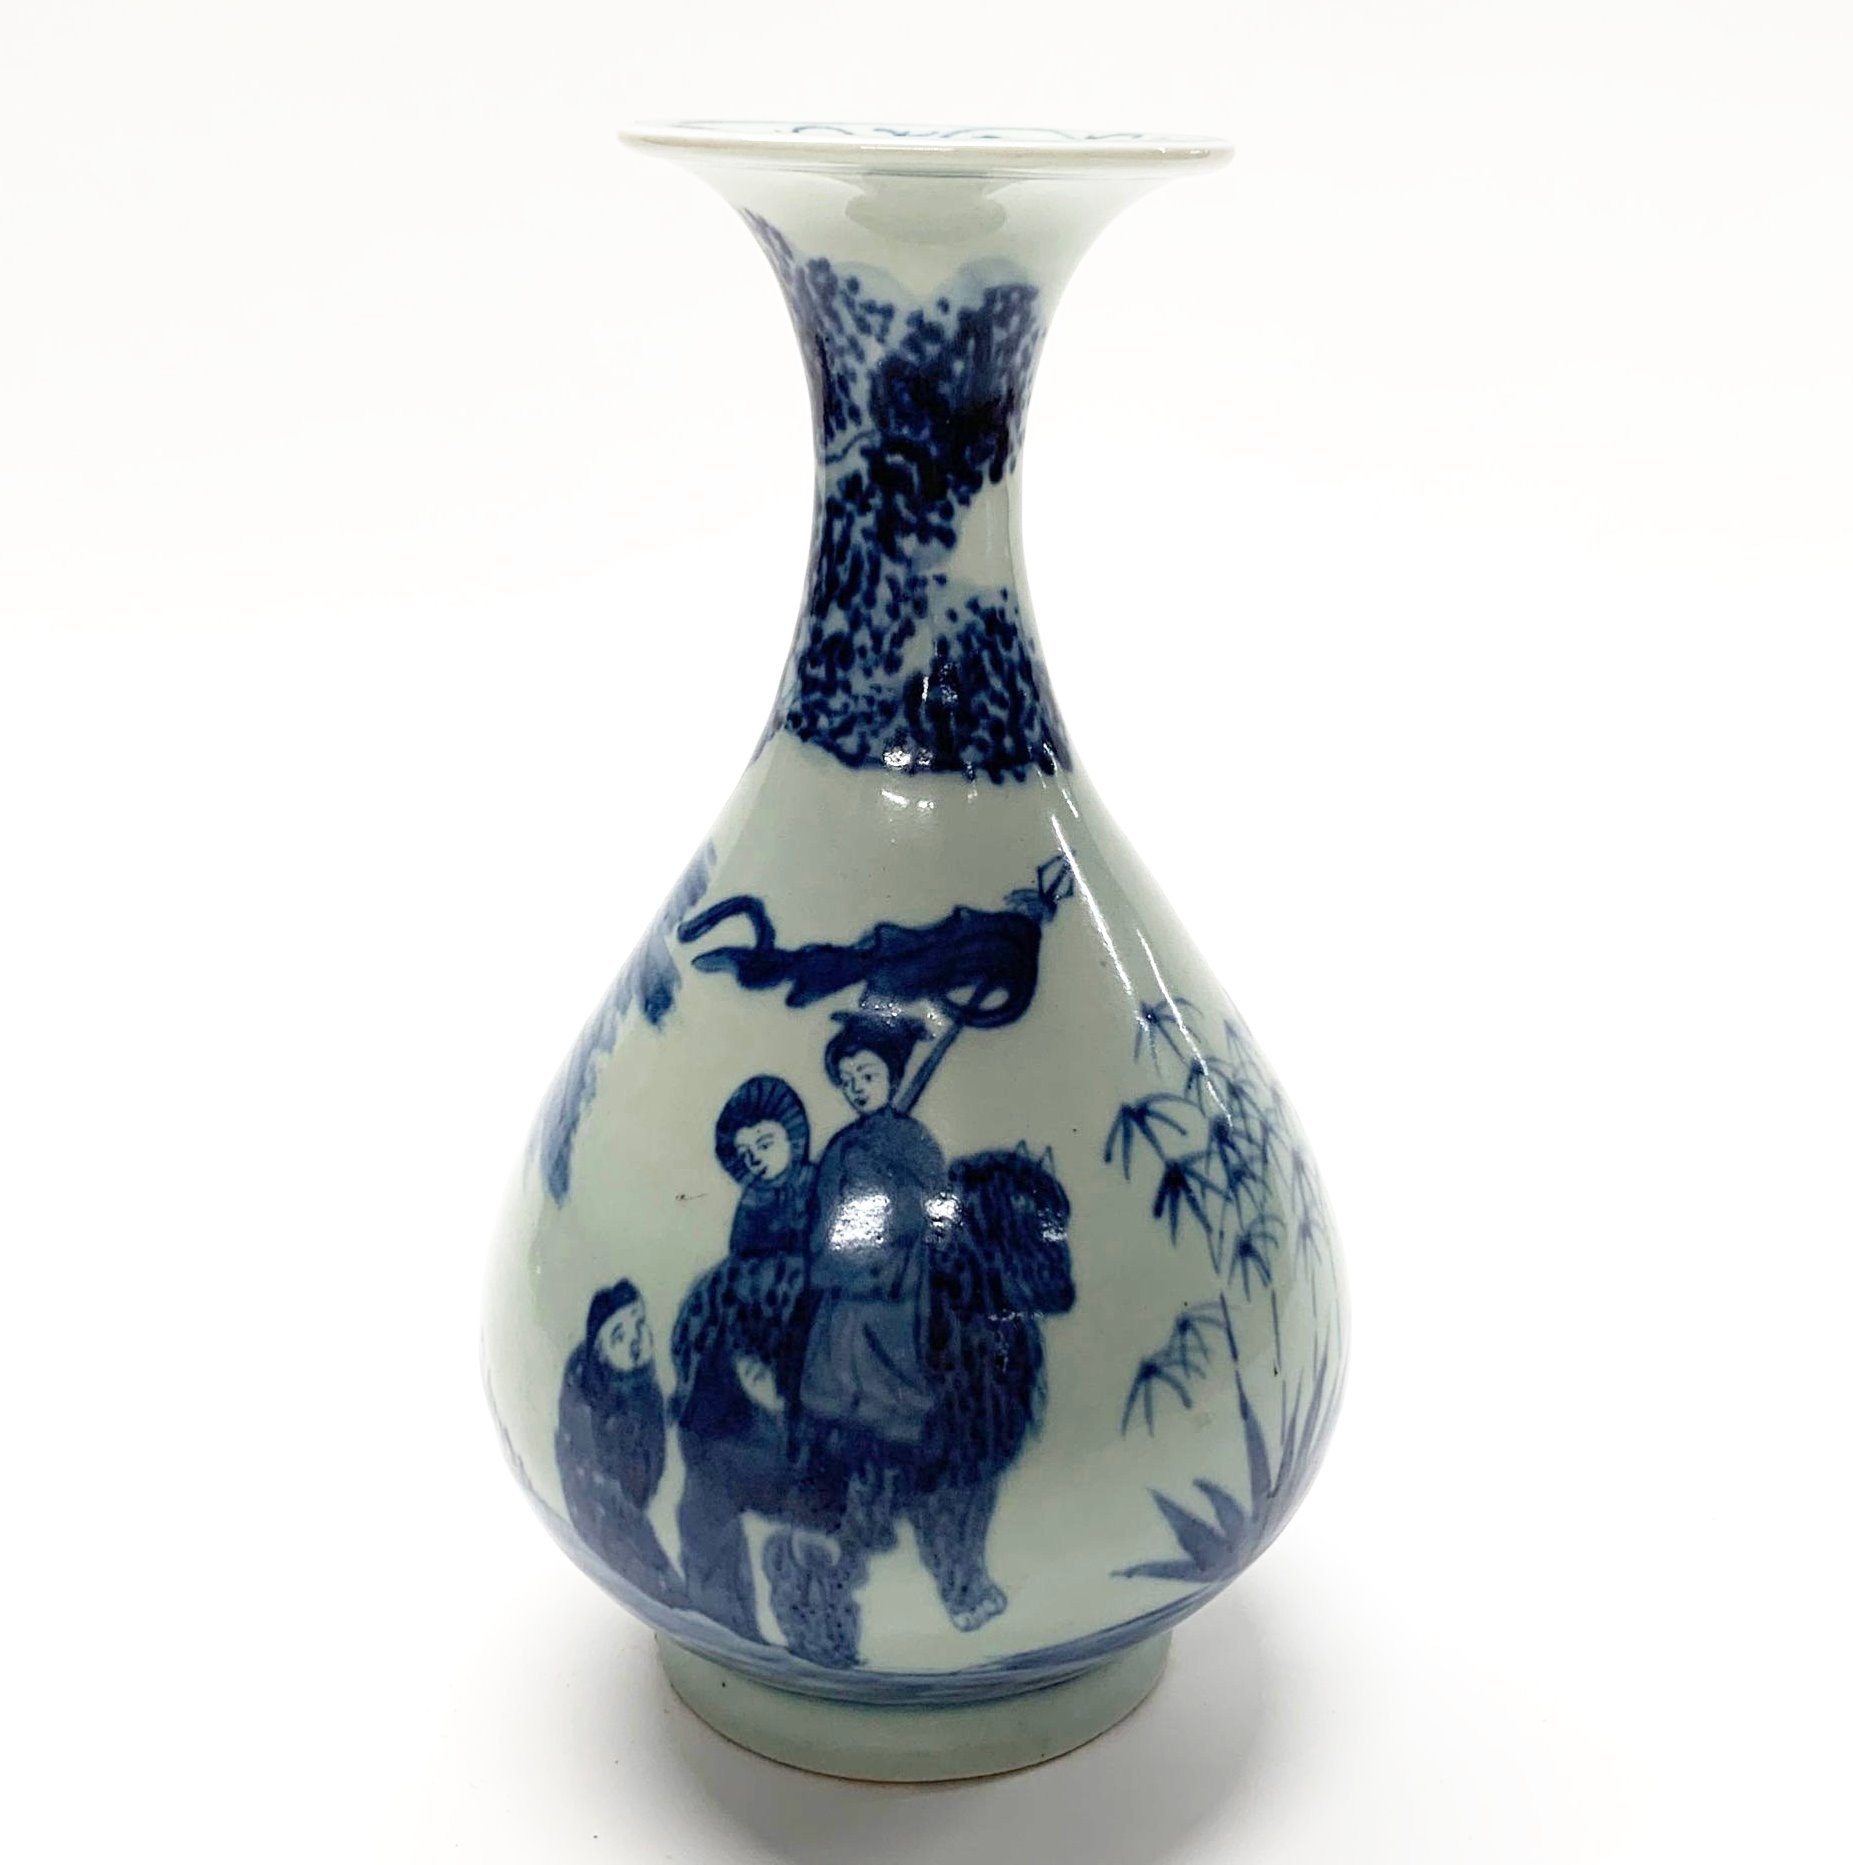 An interesting Chinese hand painted porcelain vase depicting a young woman on a horse meeting a